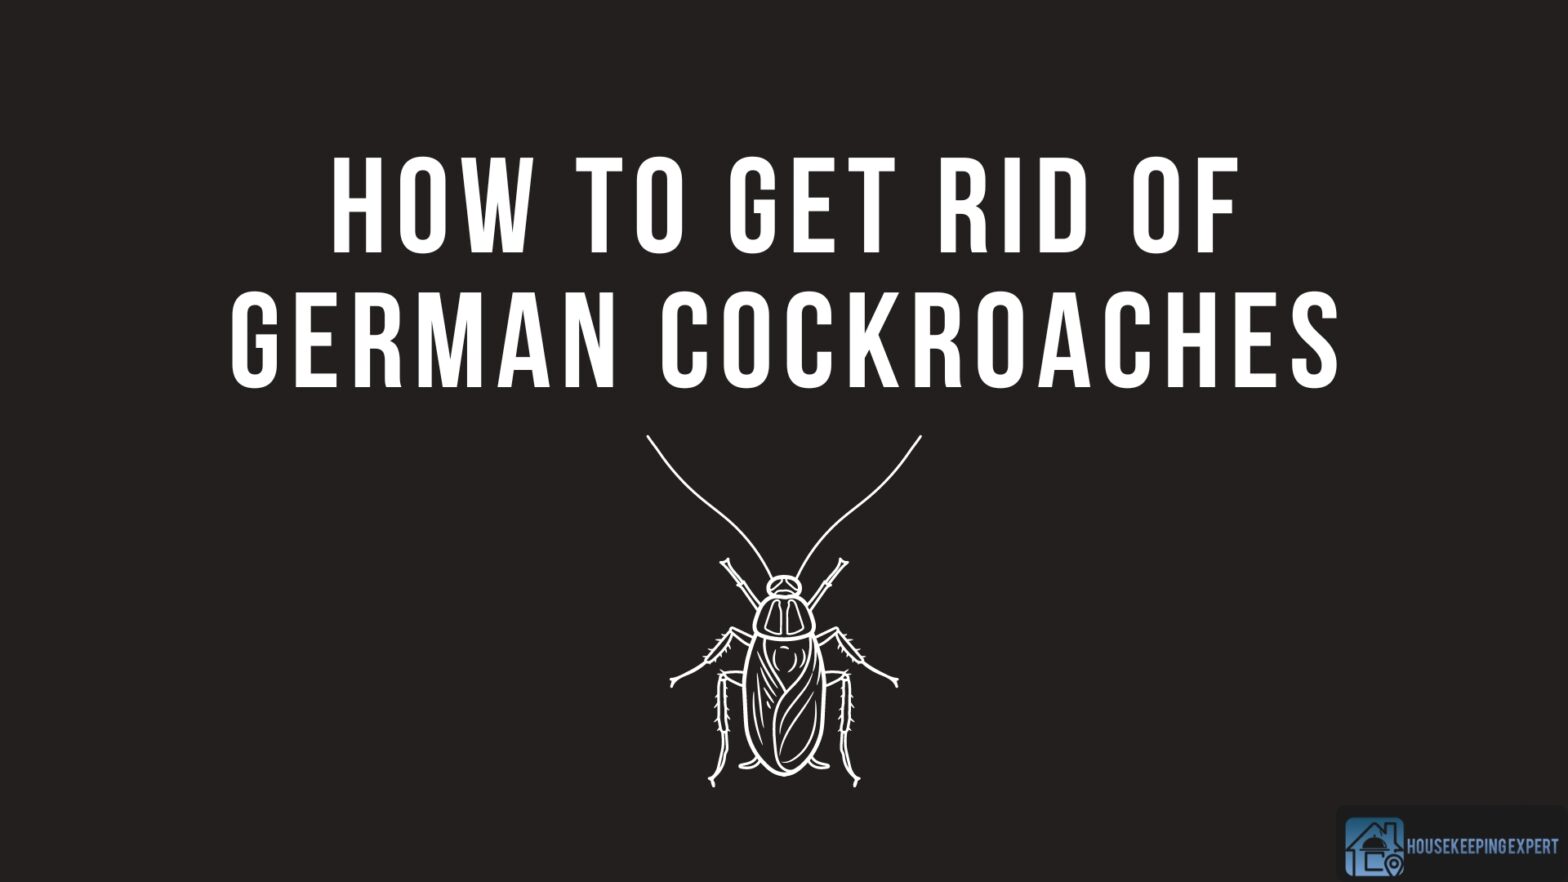 How To Get Rid Of German Cockroaches